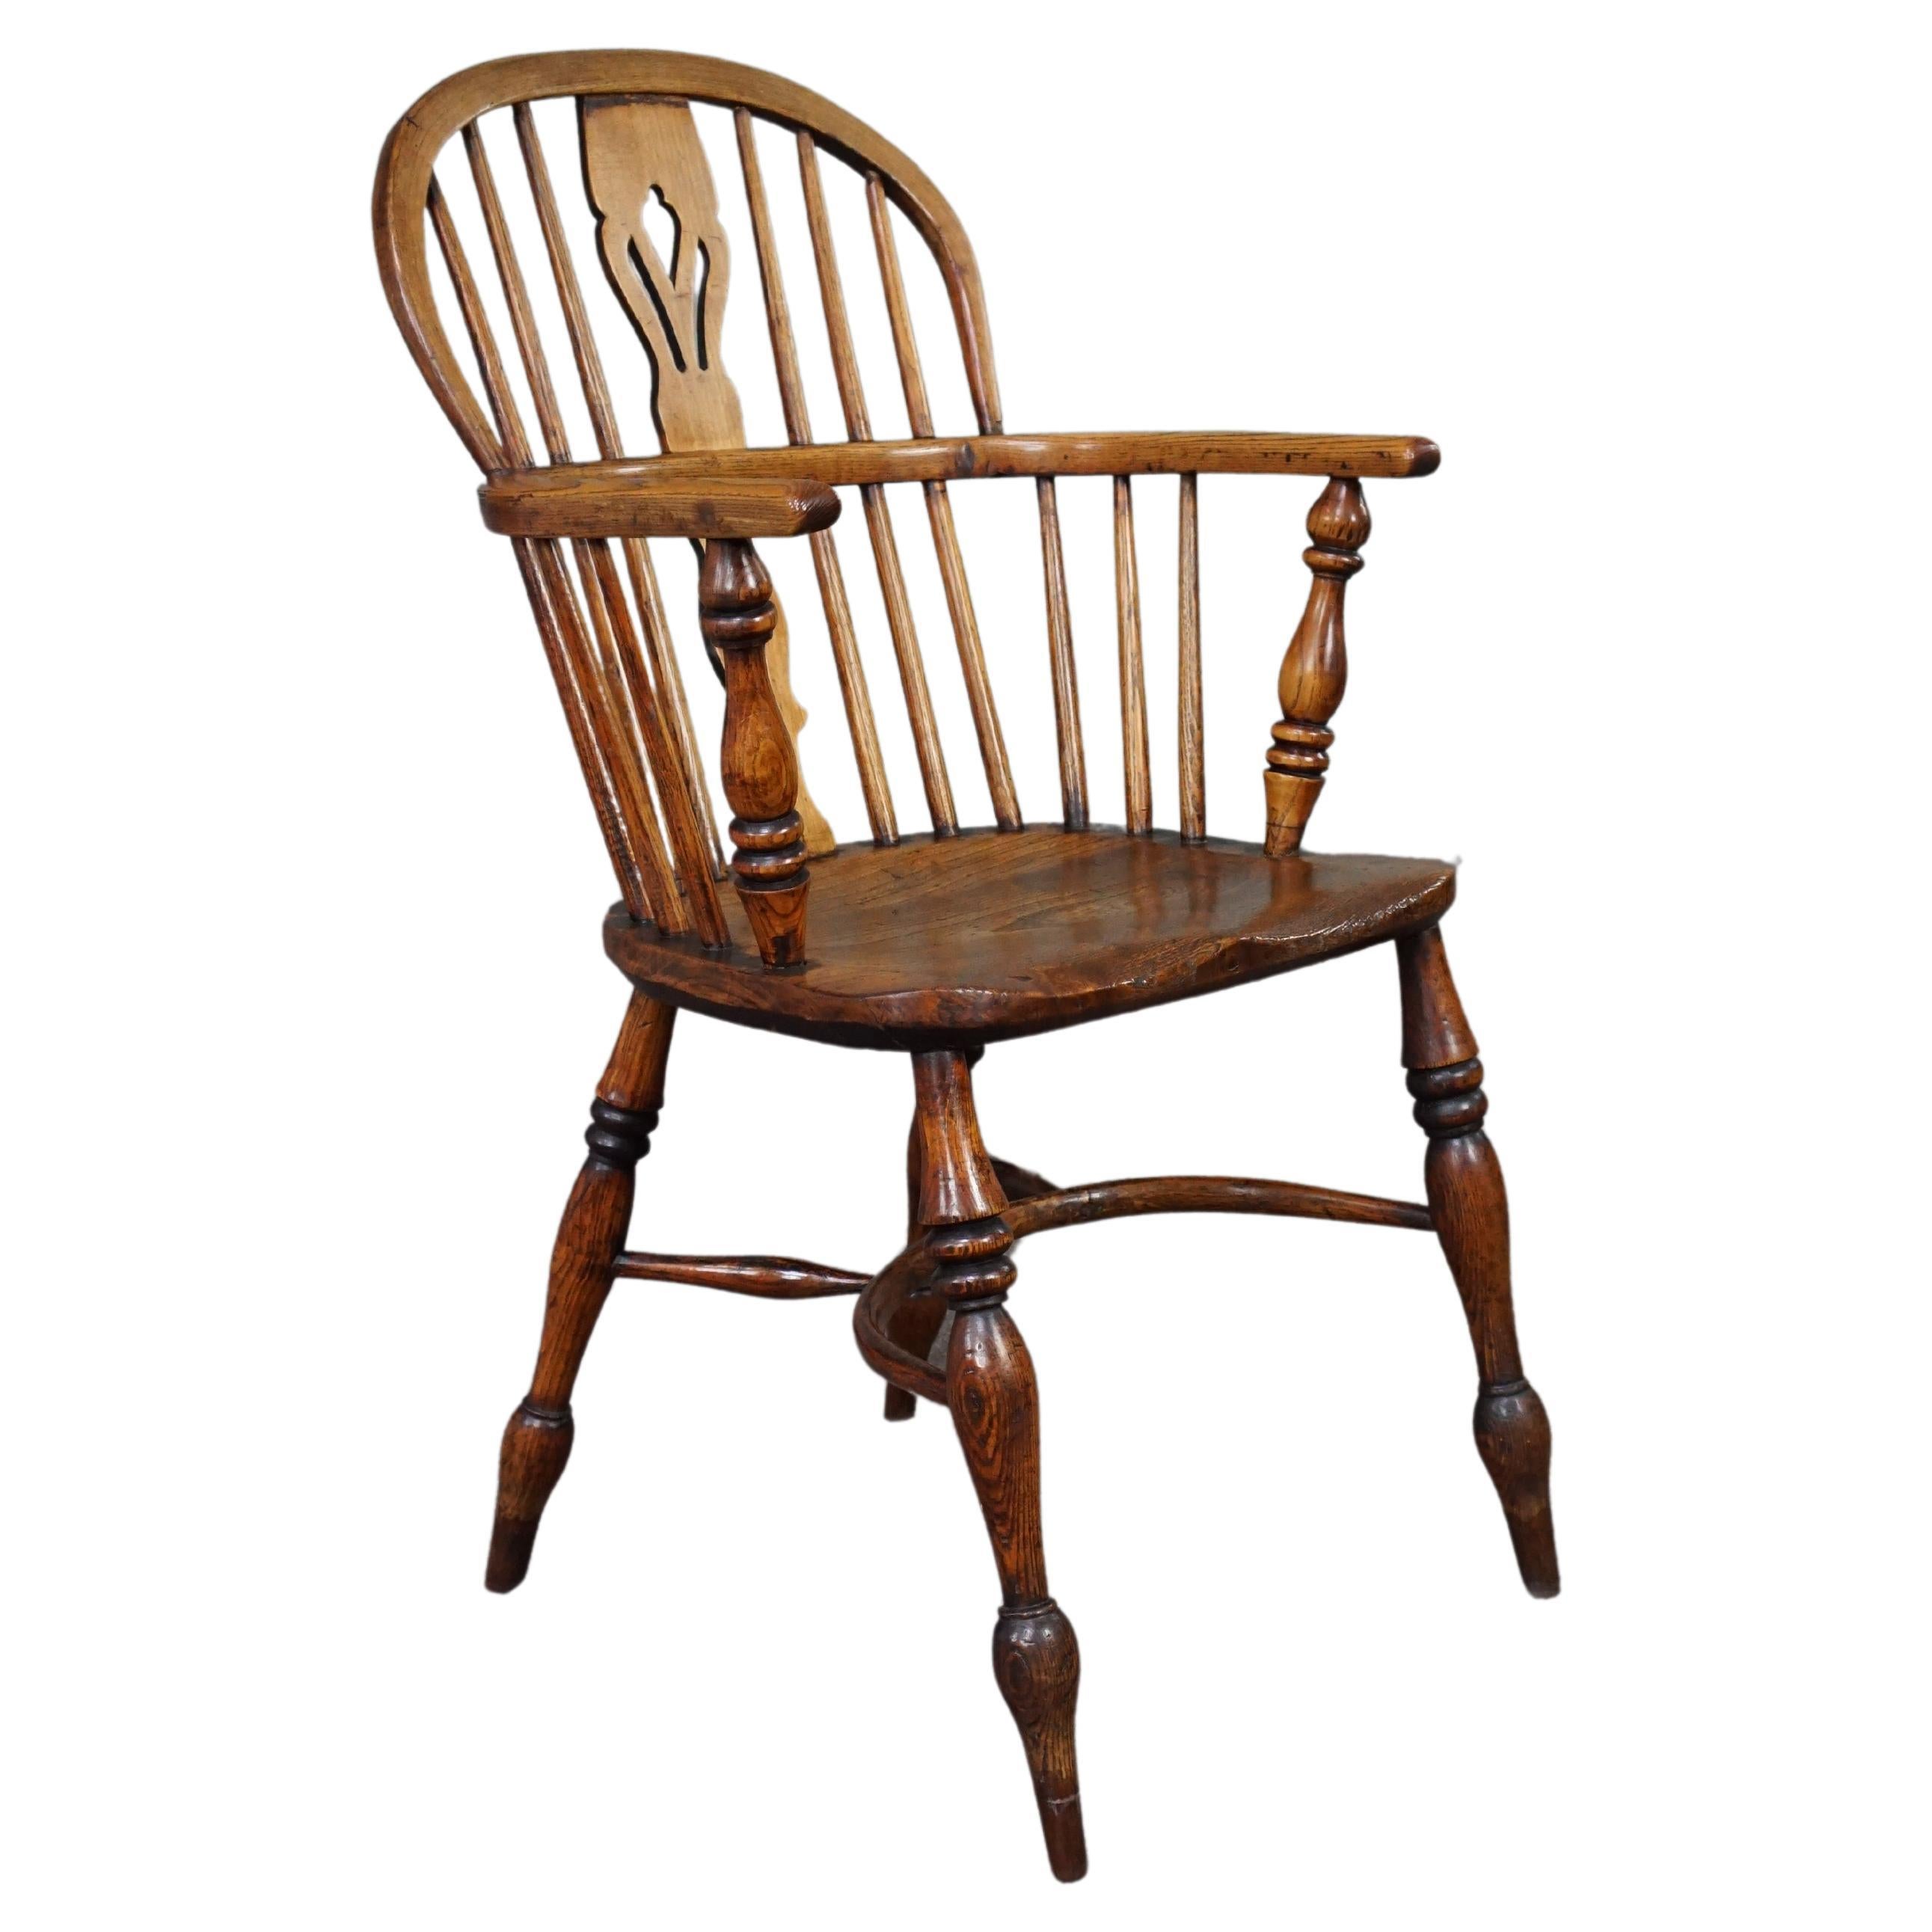 Antique Windsor chair/armchair, English Low Back, 18th century For Sale